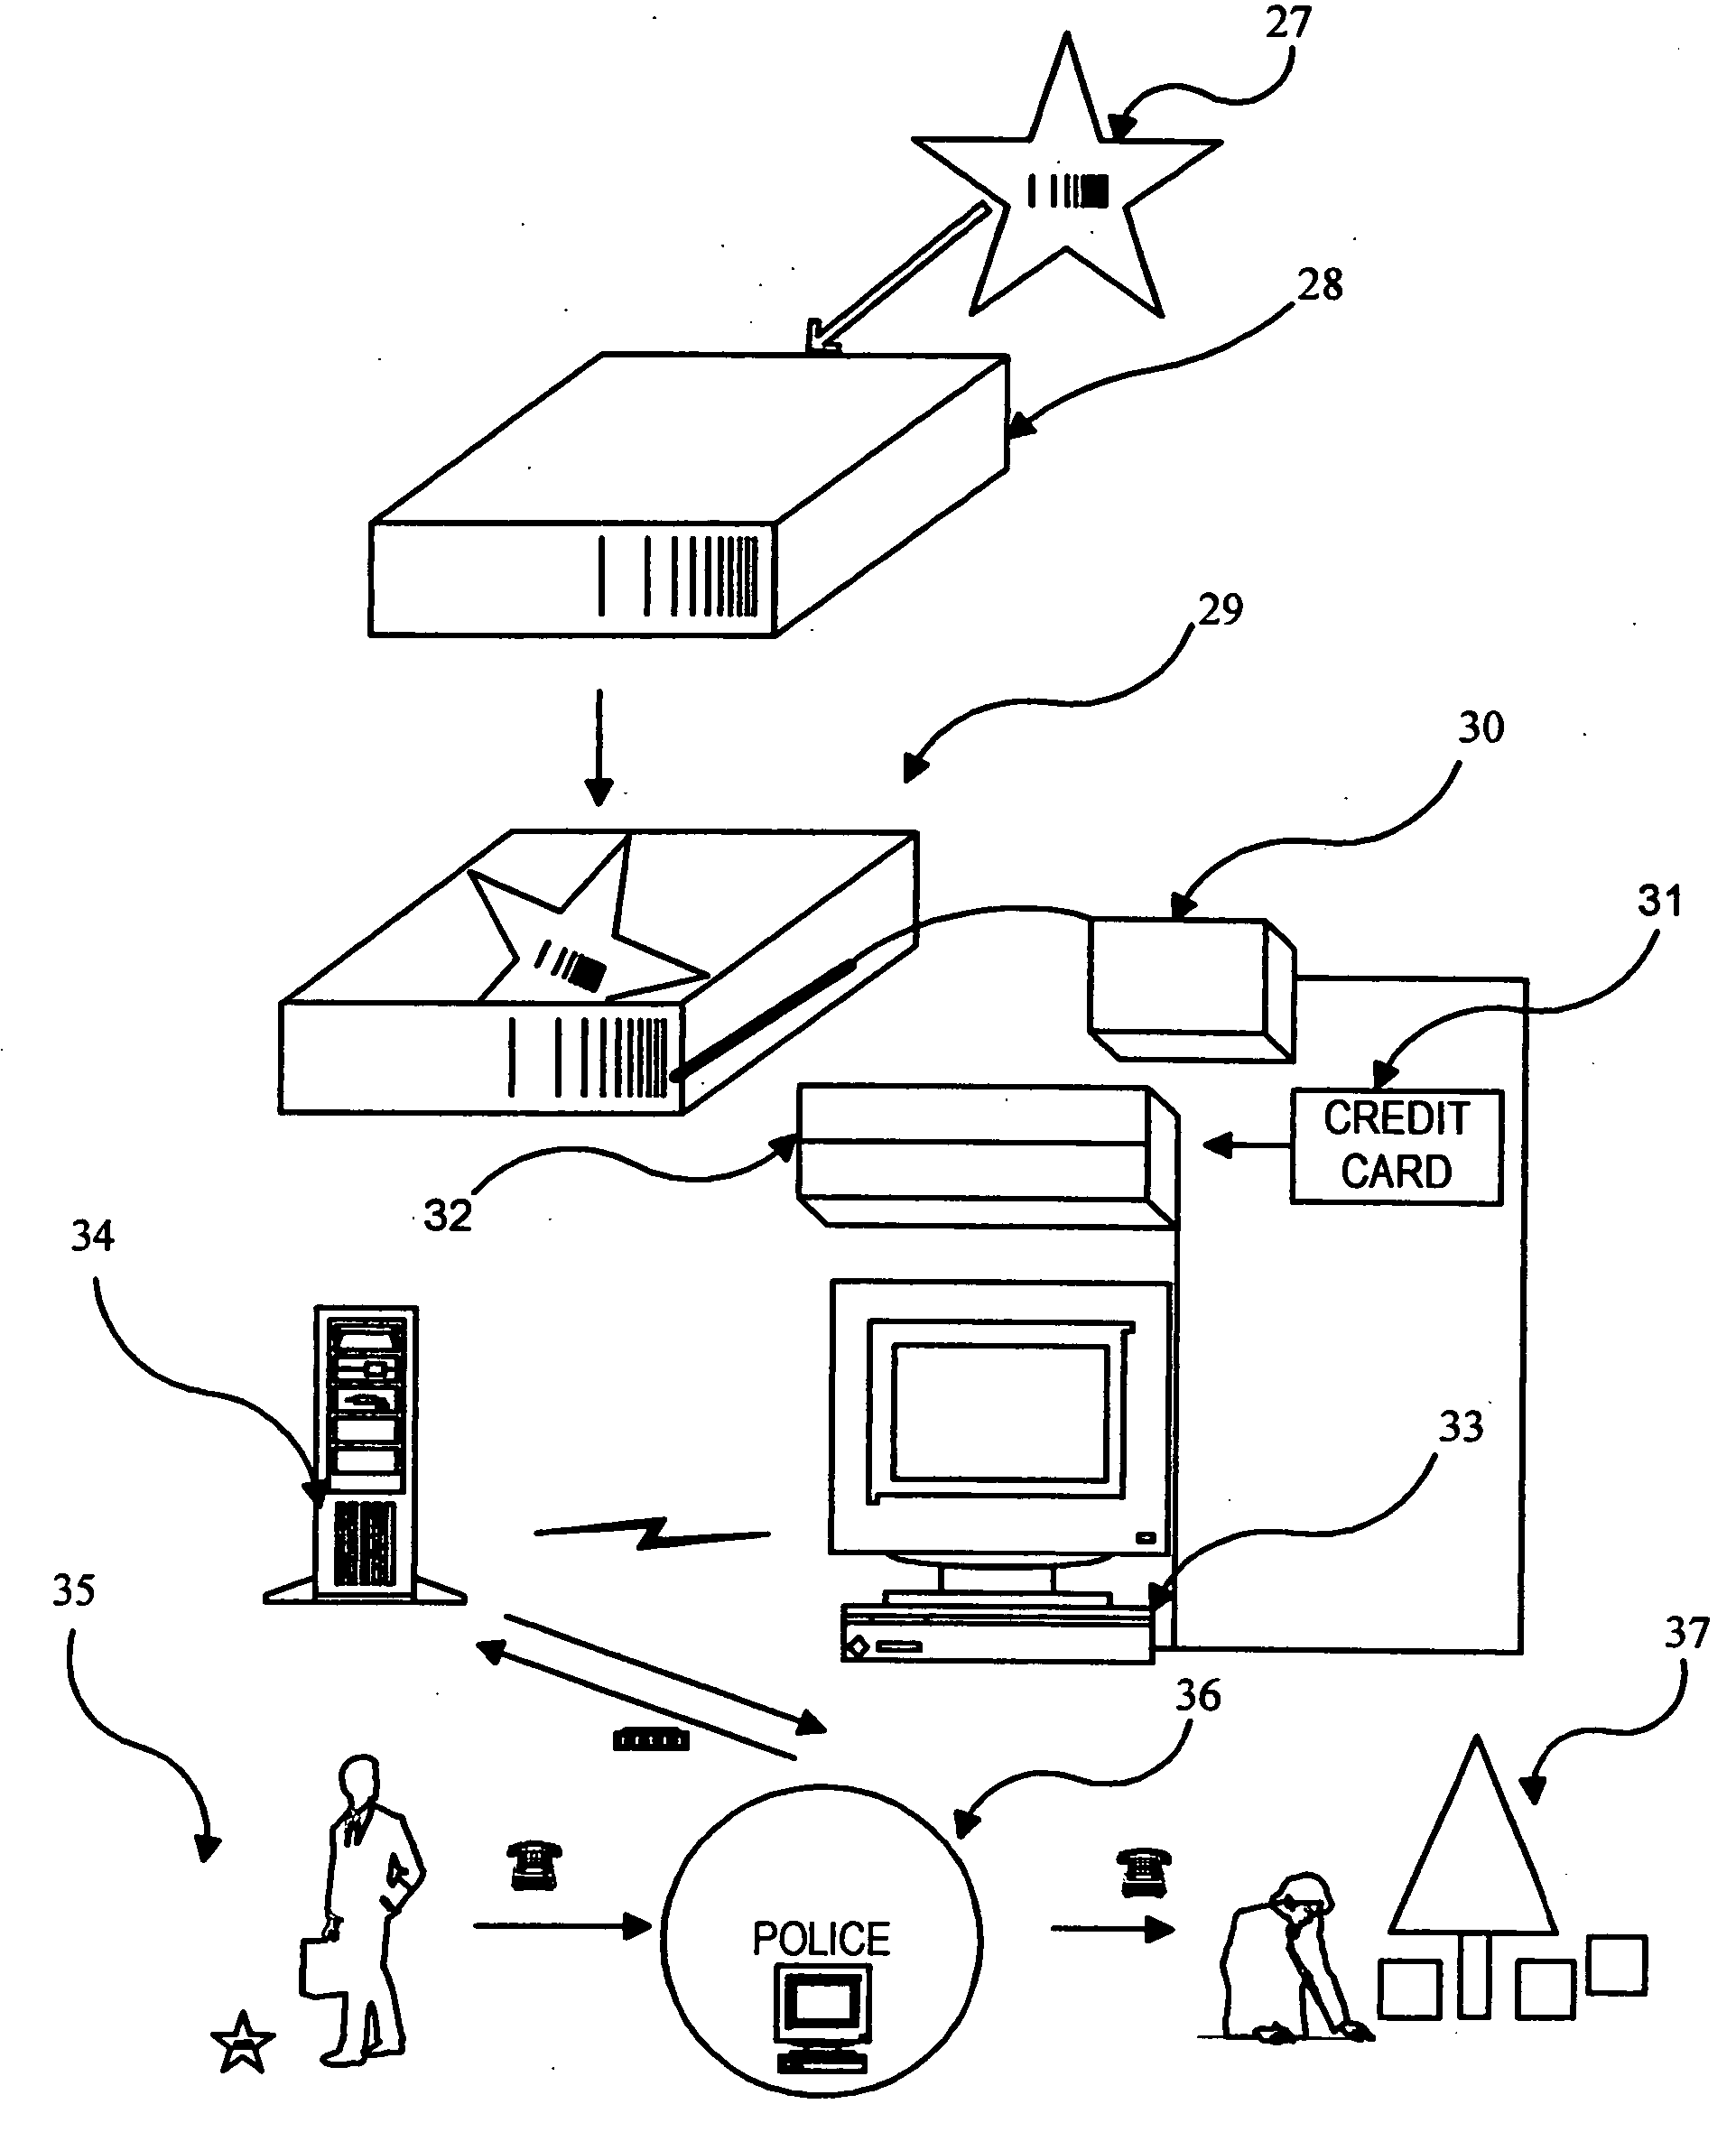 Apparatus and method for purchased product security